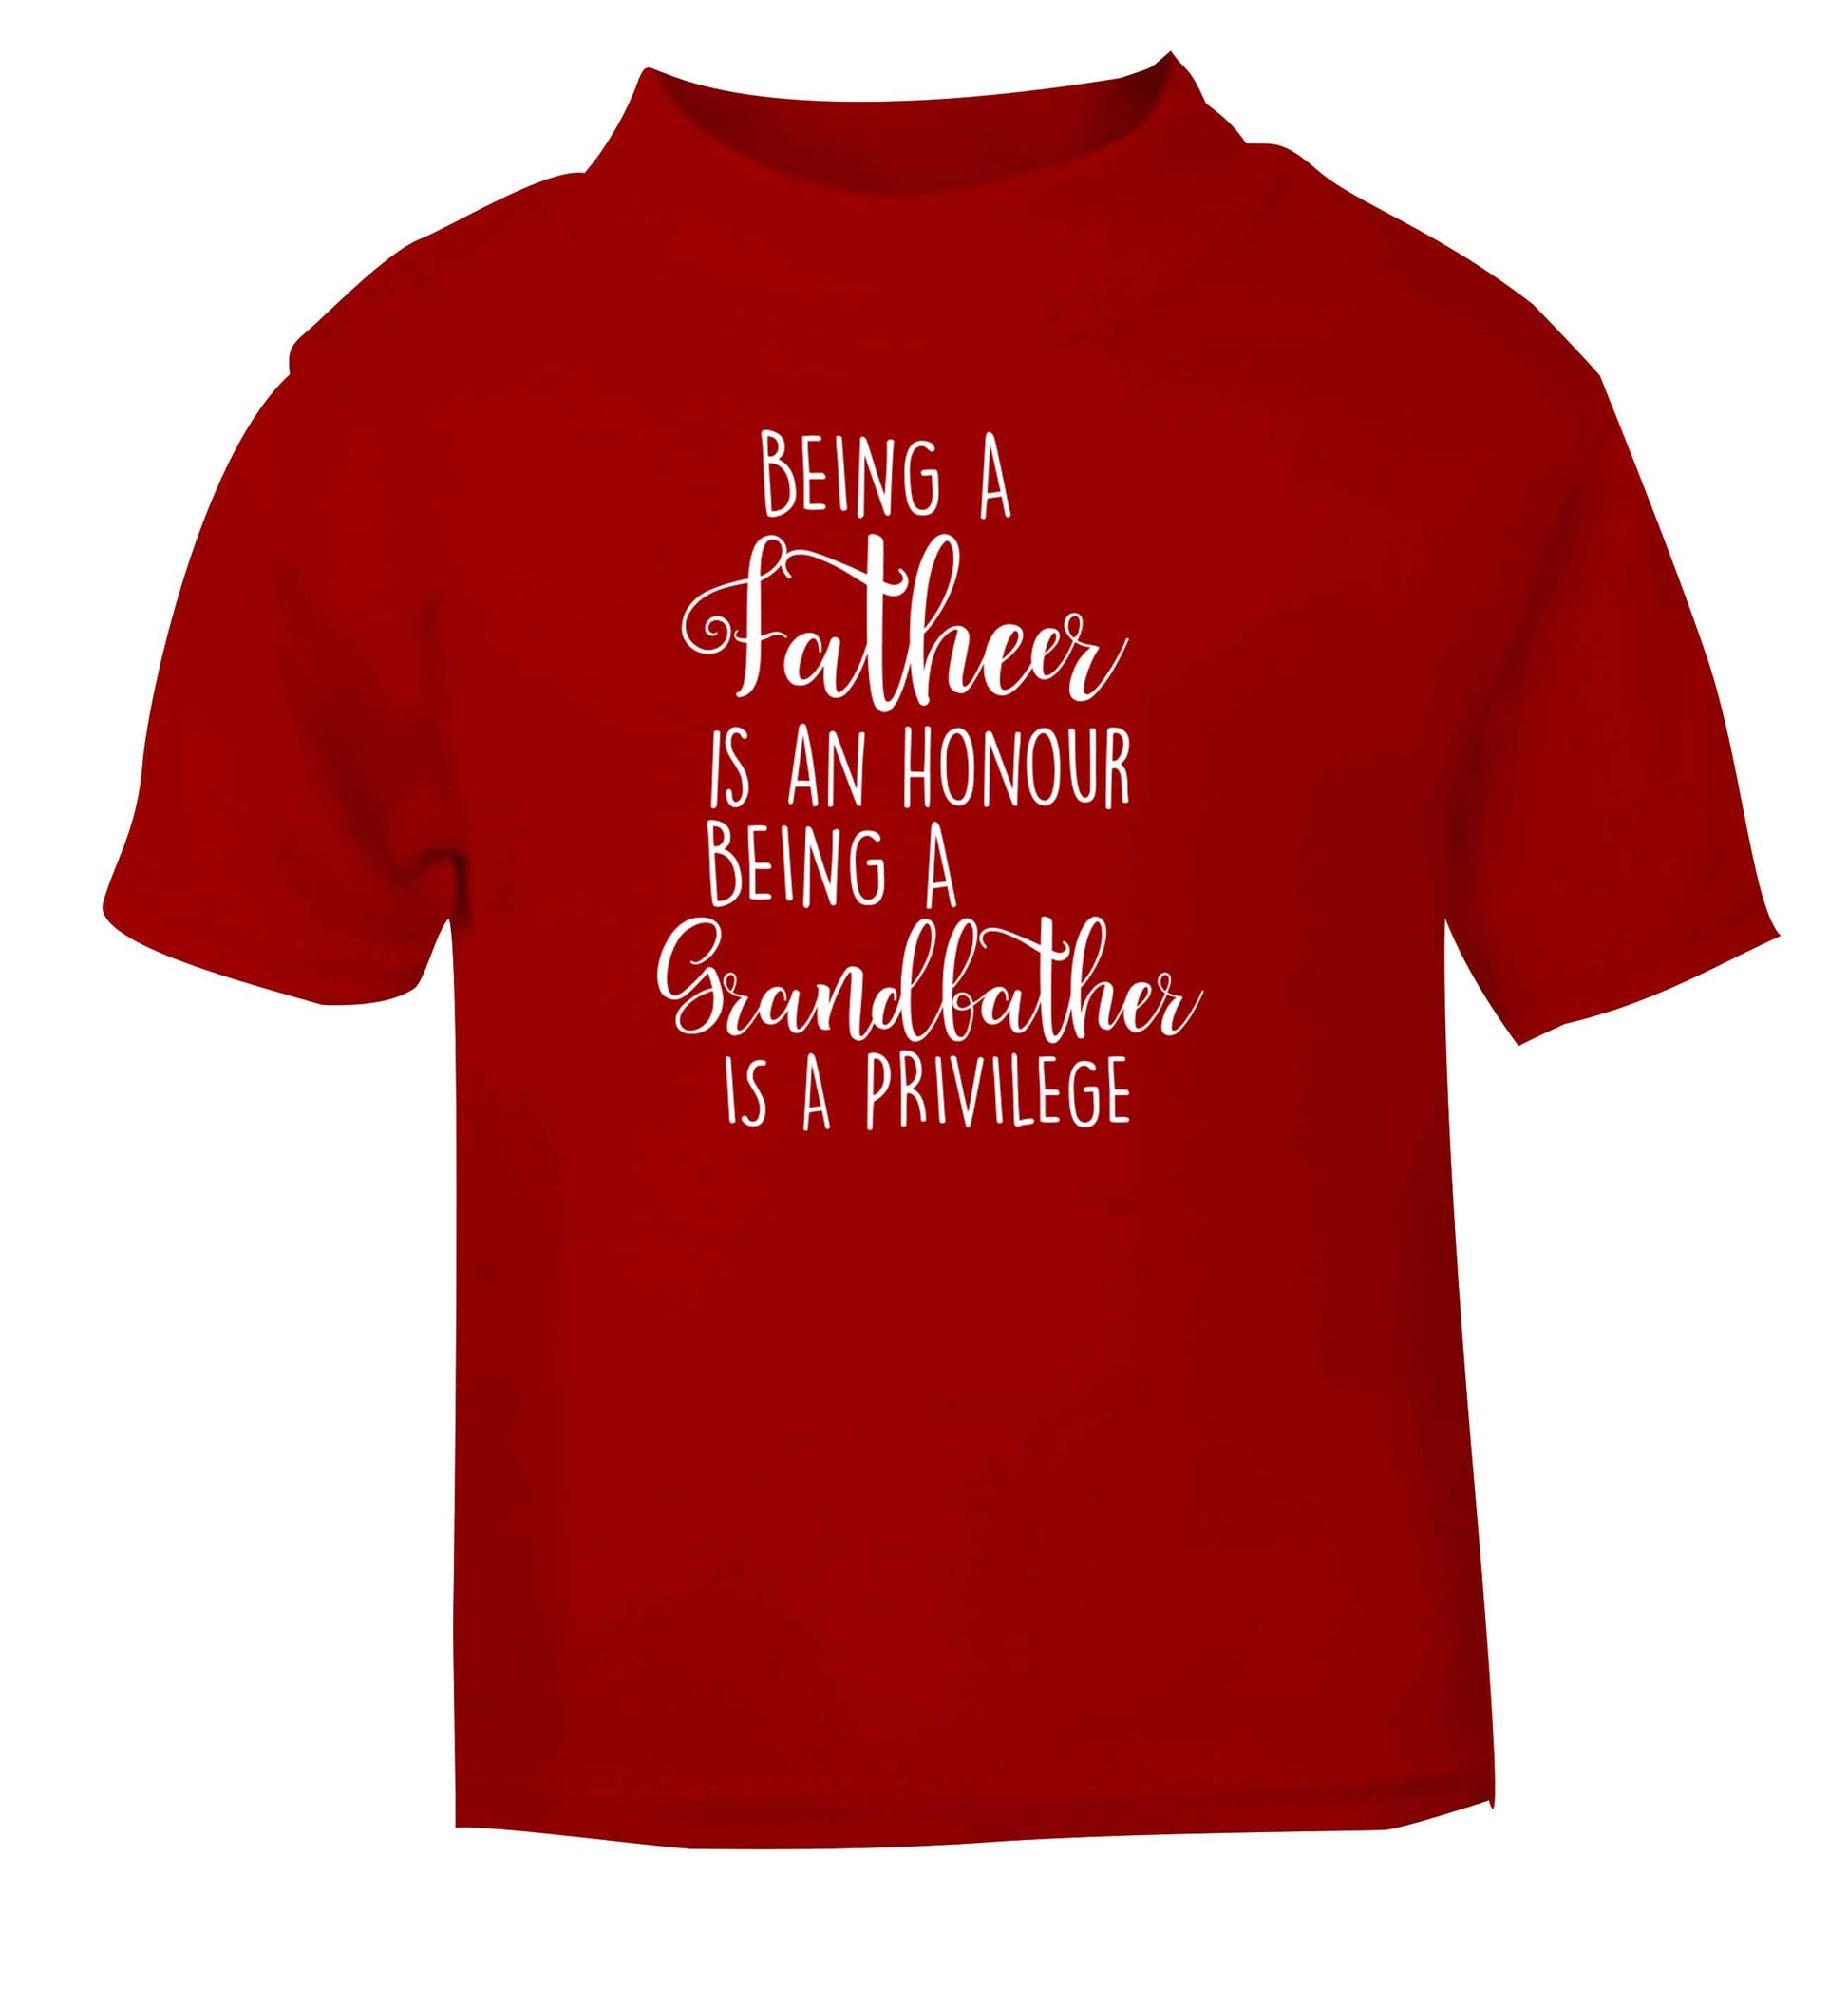 Being a father is an honour being a grandfather is a privilege red Baby Toddler Tshirt 2 Years